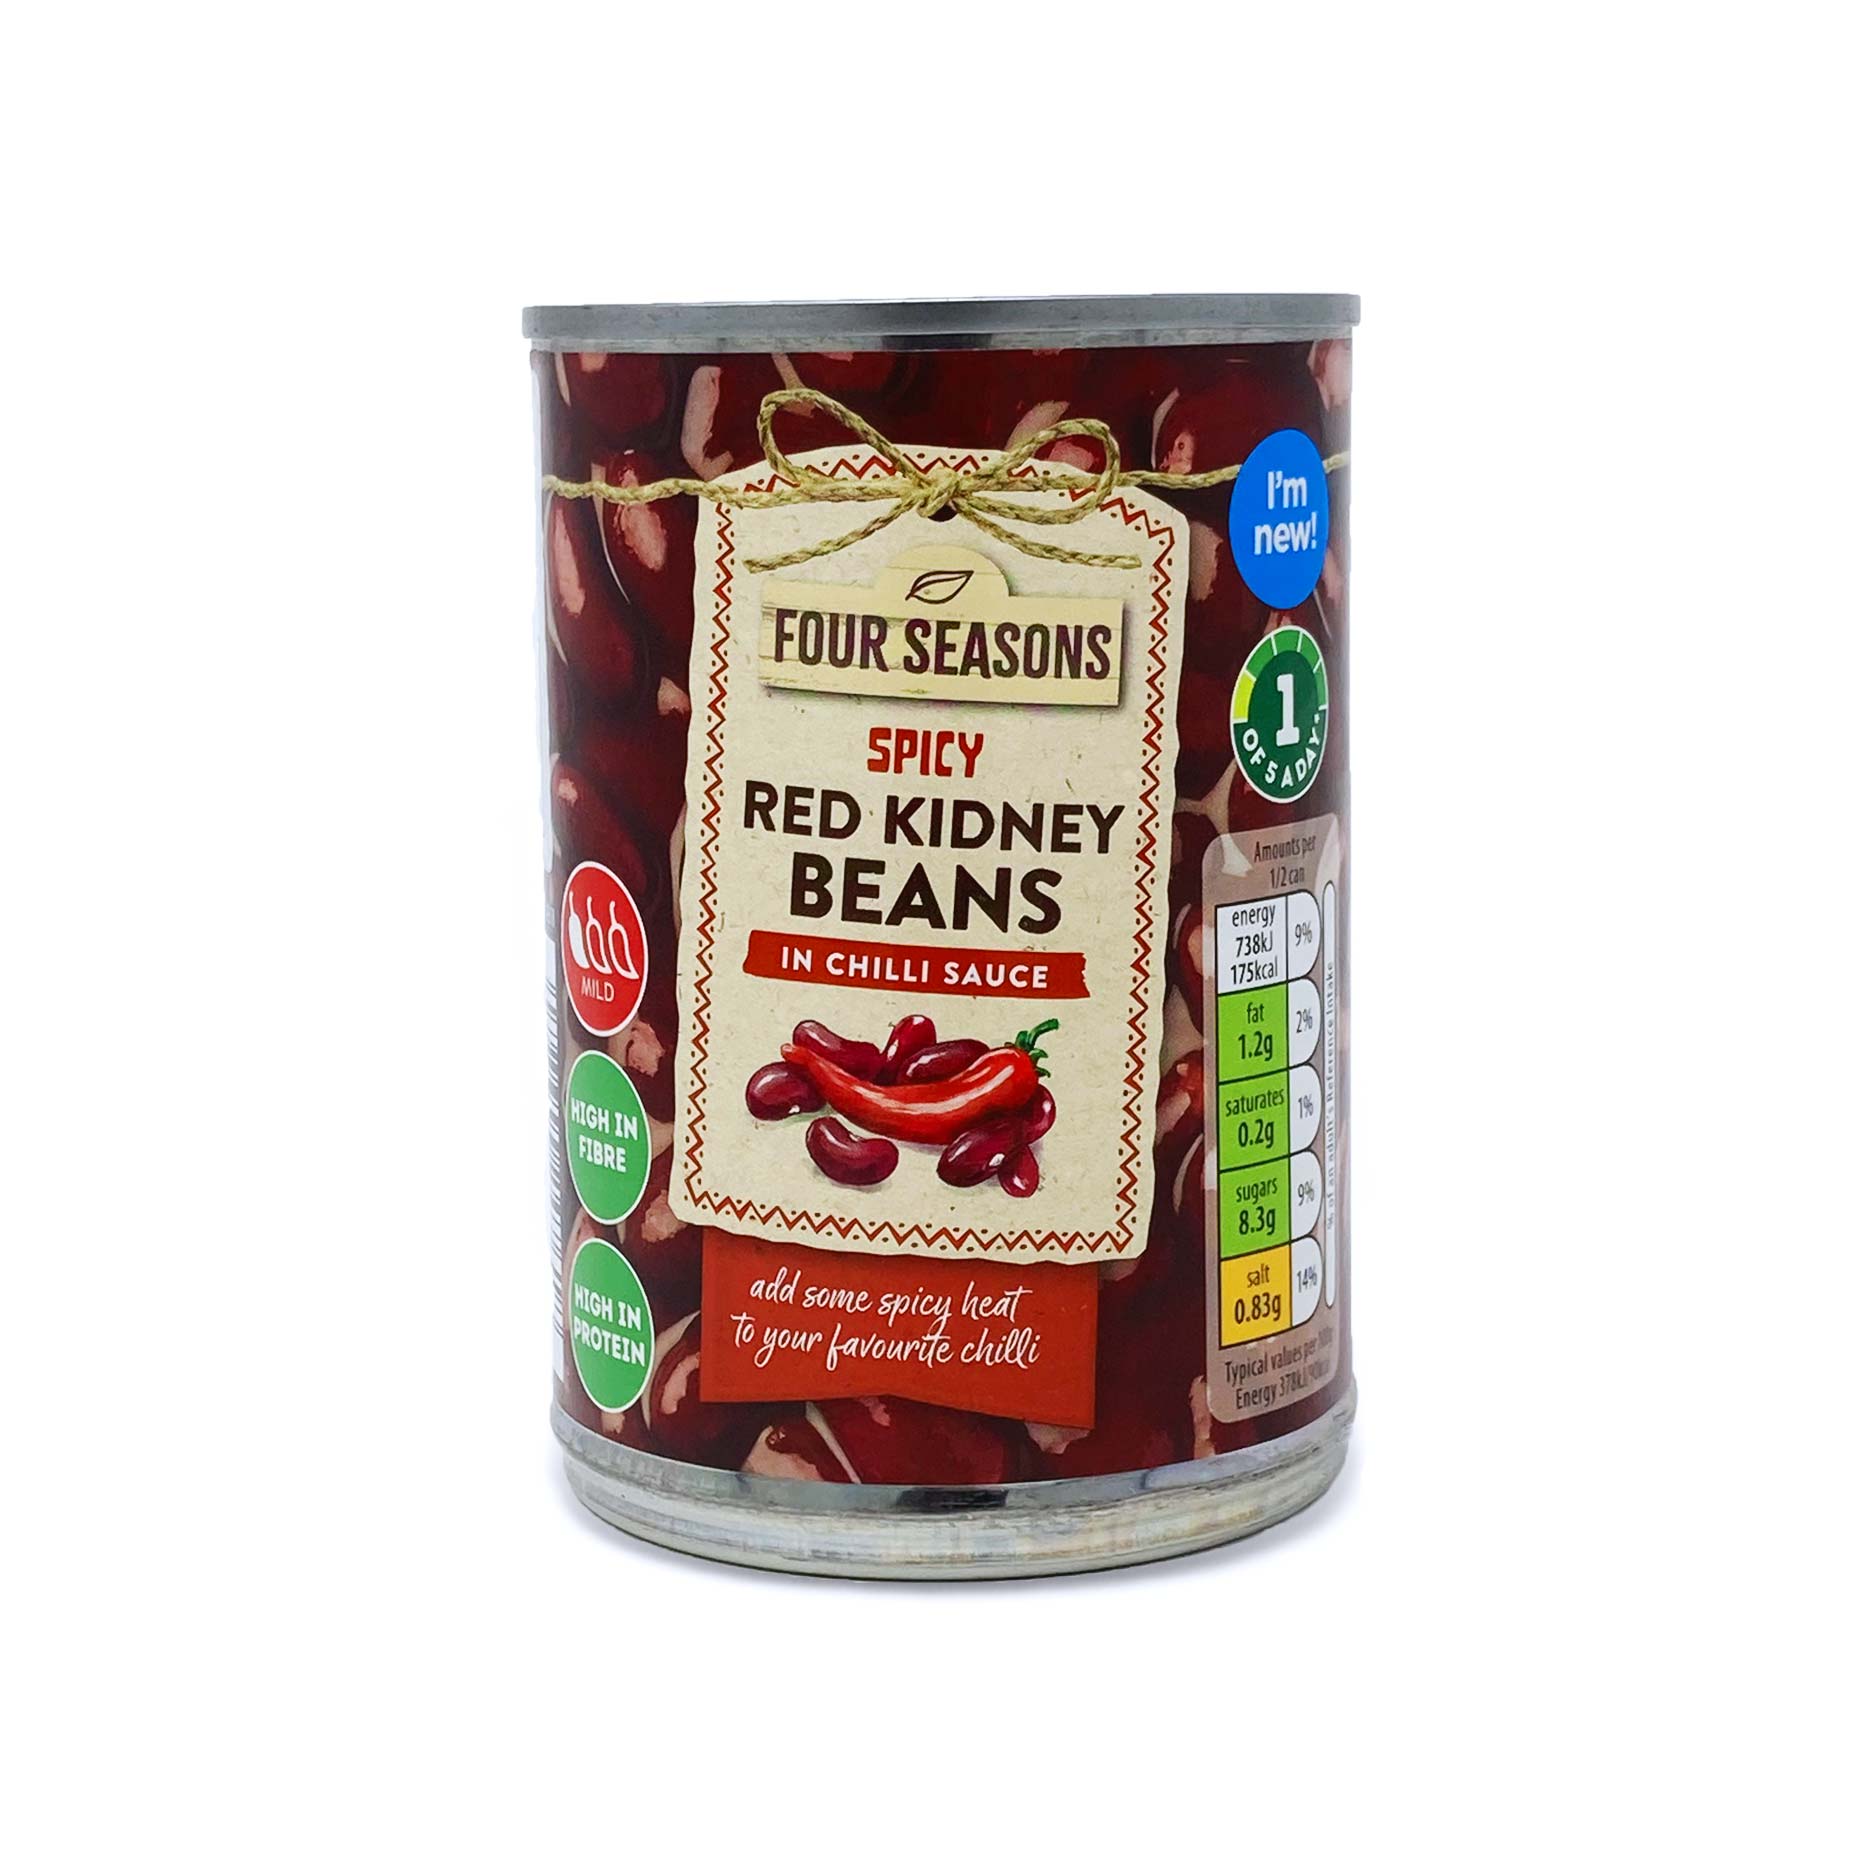 Four Seasons Spicy Red Kidney Beans In Chilli Sauce 395g